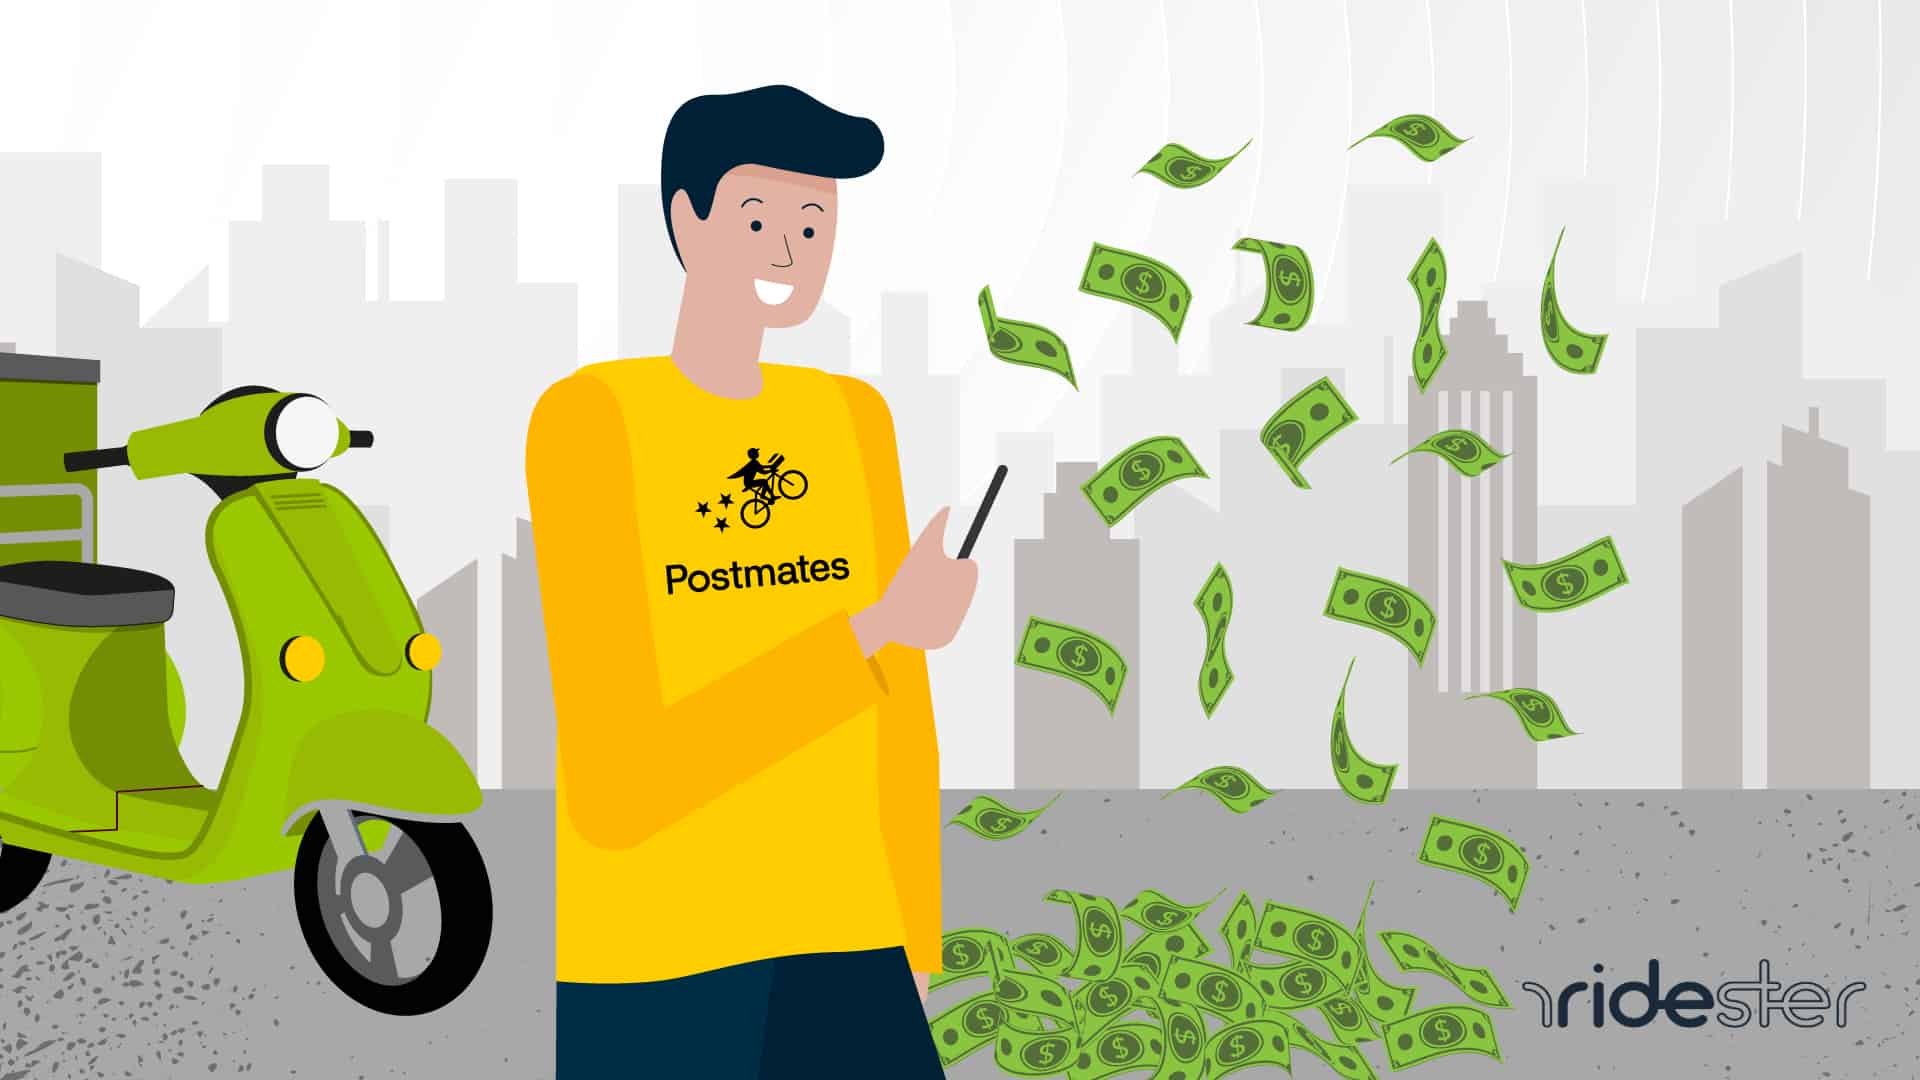 vector image of a man holding a smartphone wearing a postmates shirt to show how much does postmates pay point